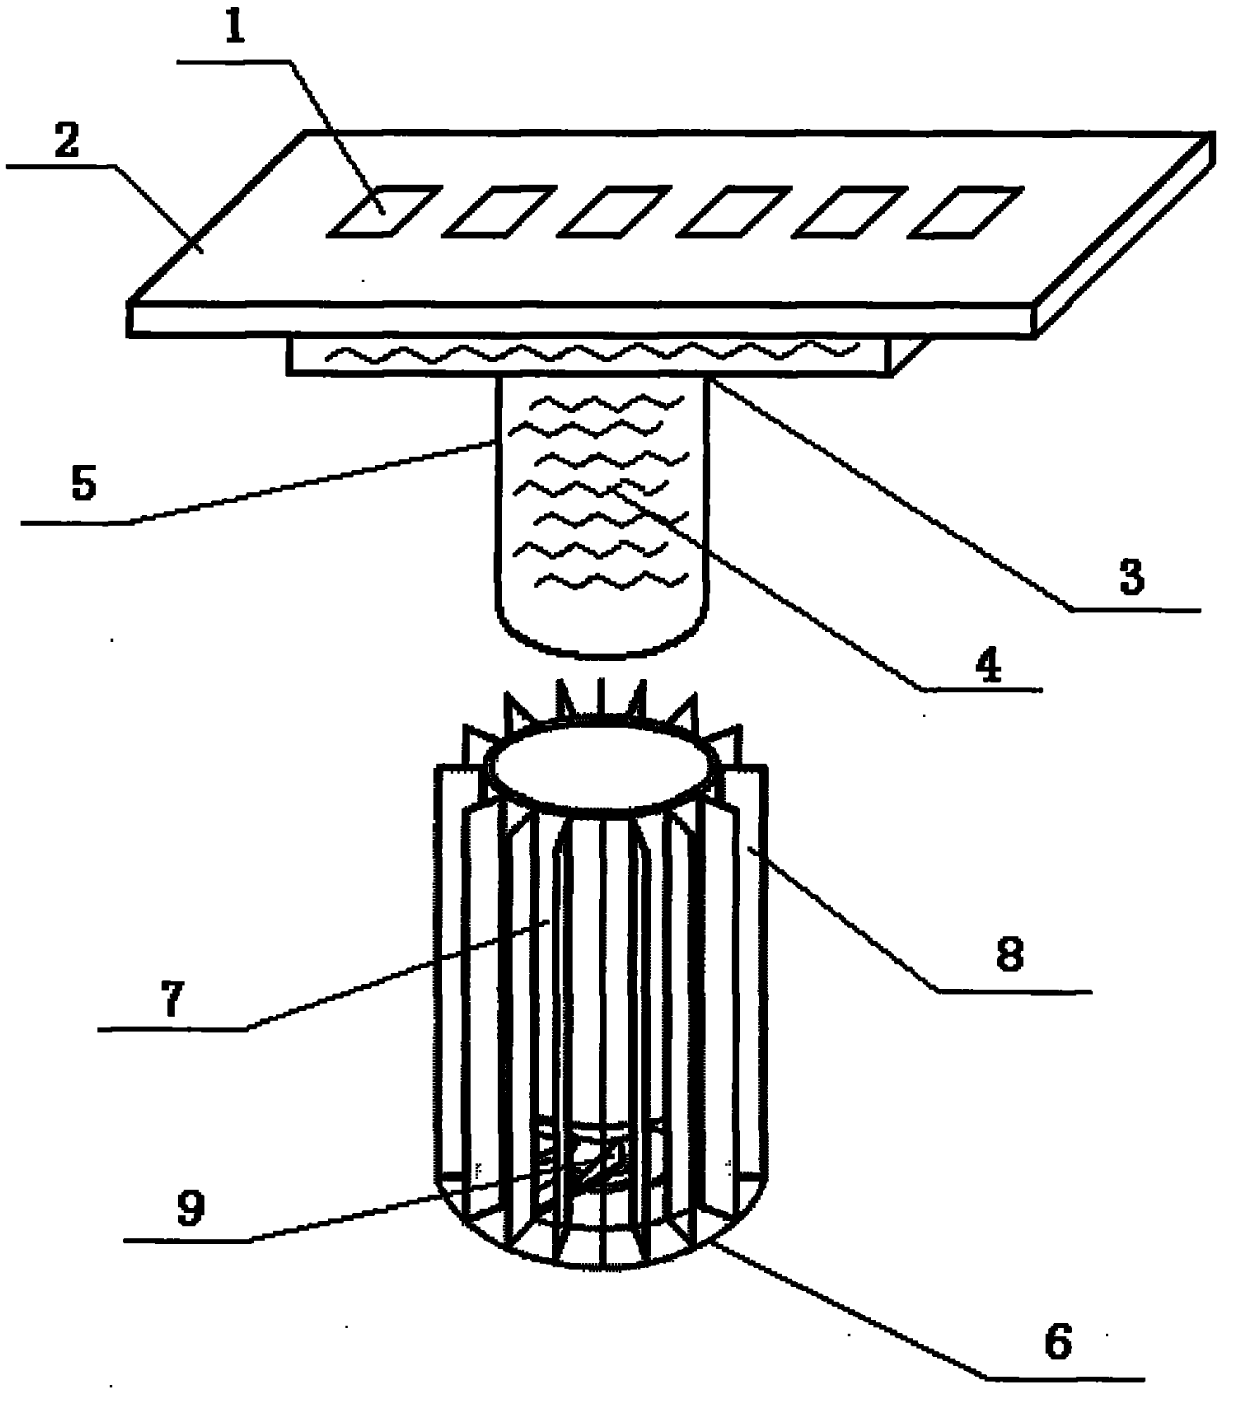 Radiating device of multi-chip combined LED (light emitting diode)